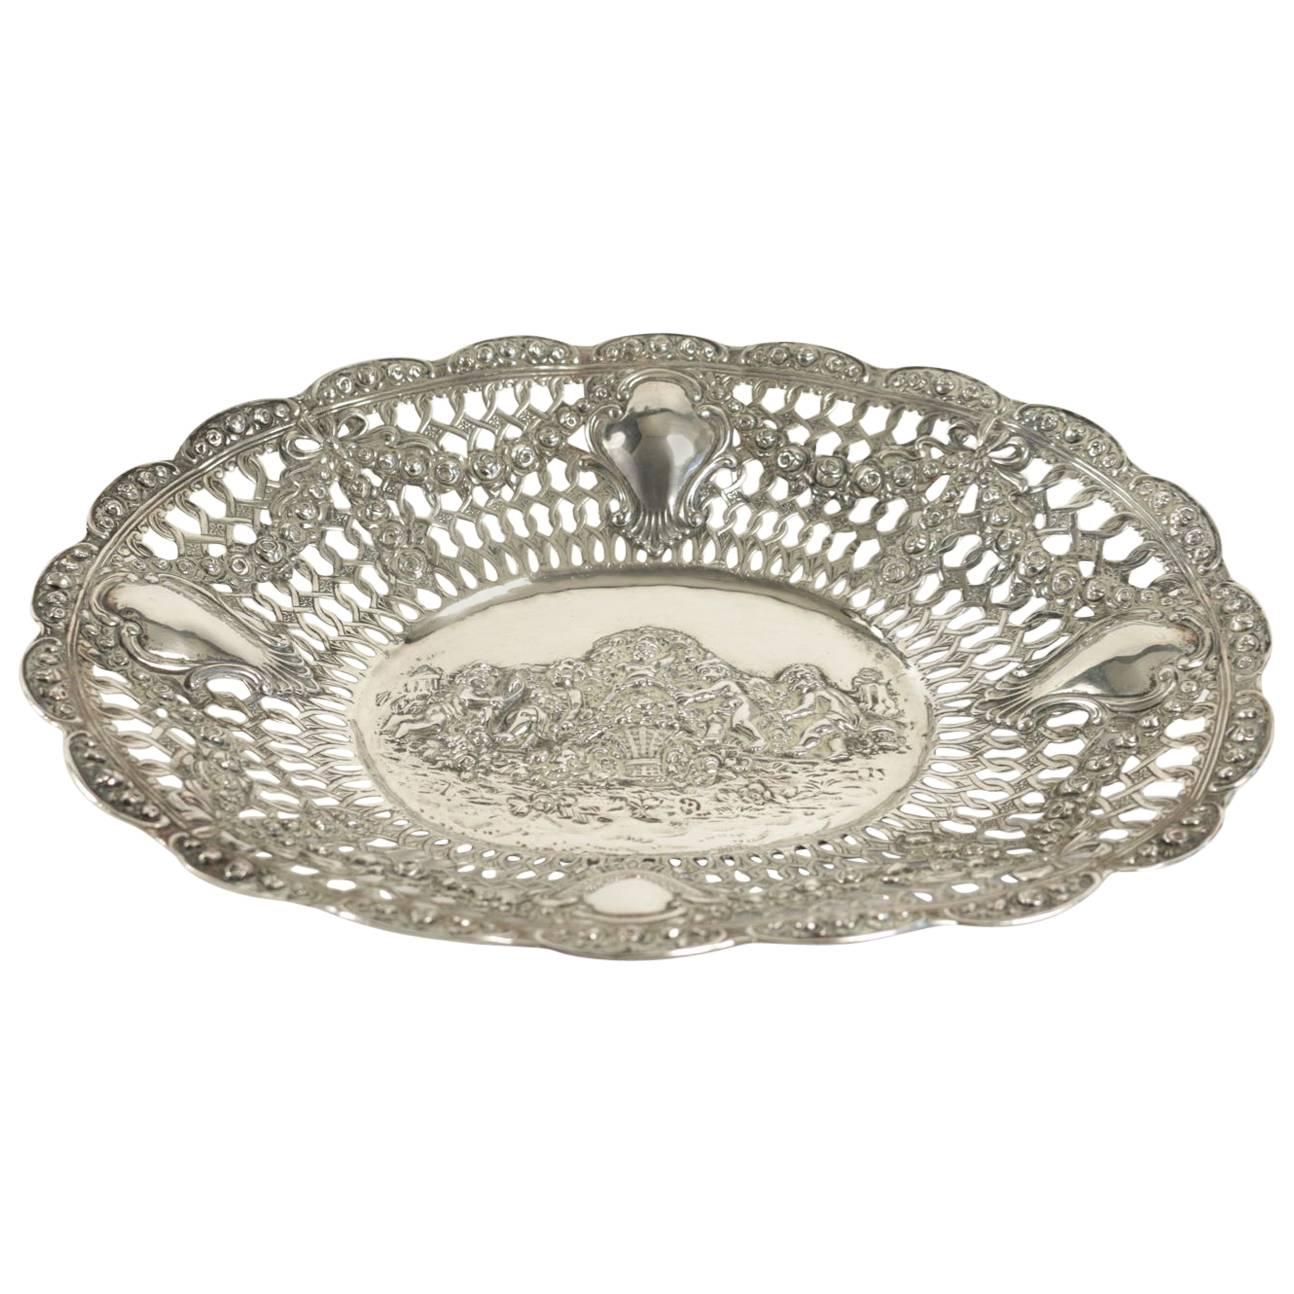 19th Century Sterling Silver Pierced Dish with Cherubs and Garlands of Flowers